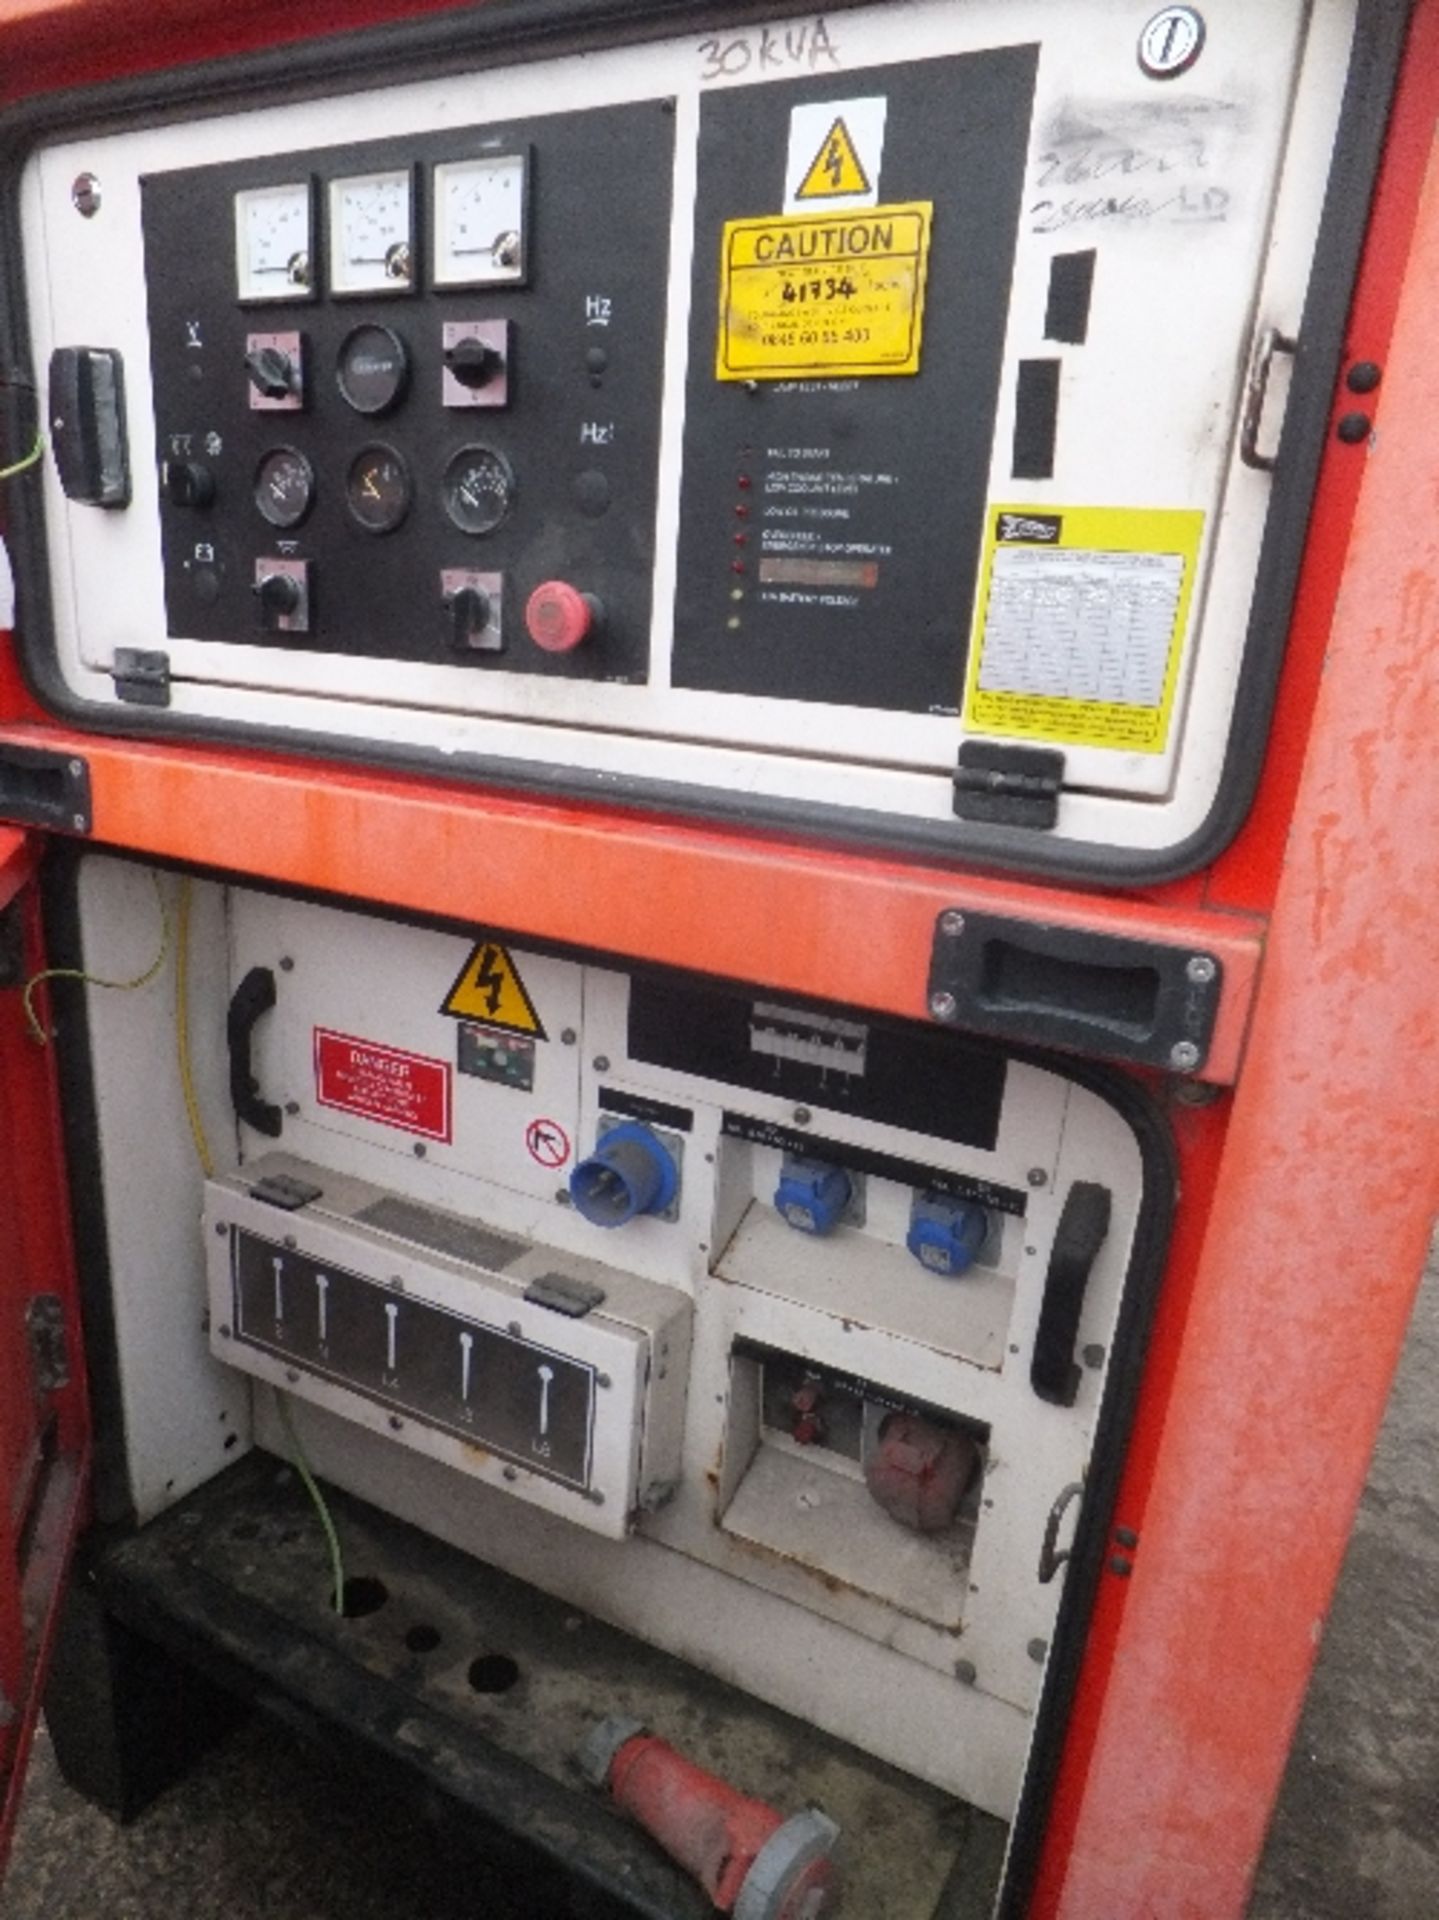 FG Wilson 30kva generator 42095hrs This lot is sold on behalf of Speedy - Image 4 of 6